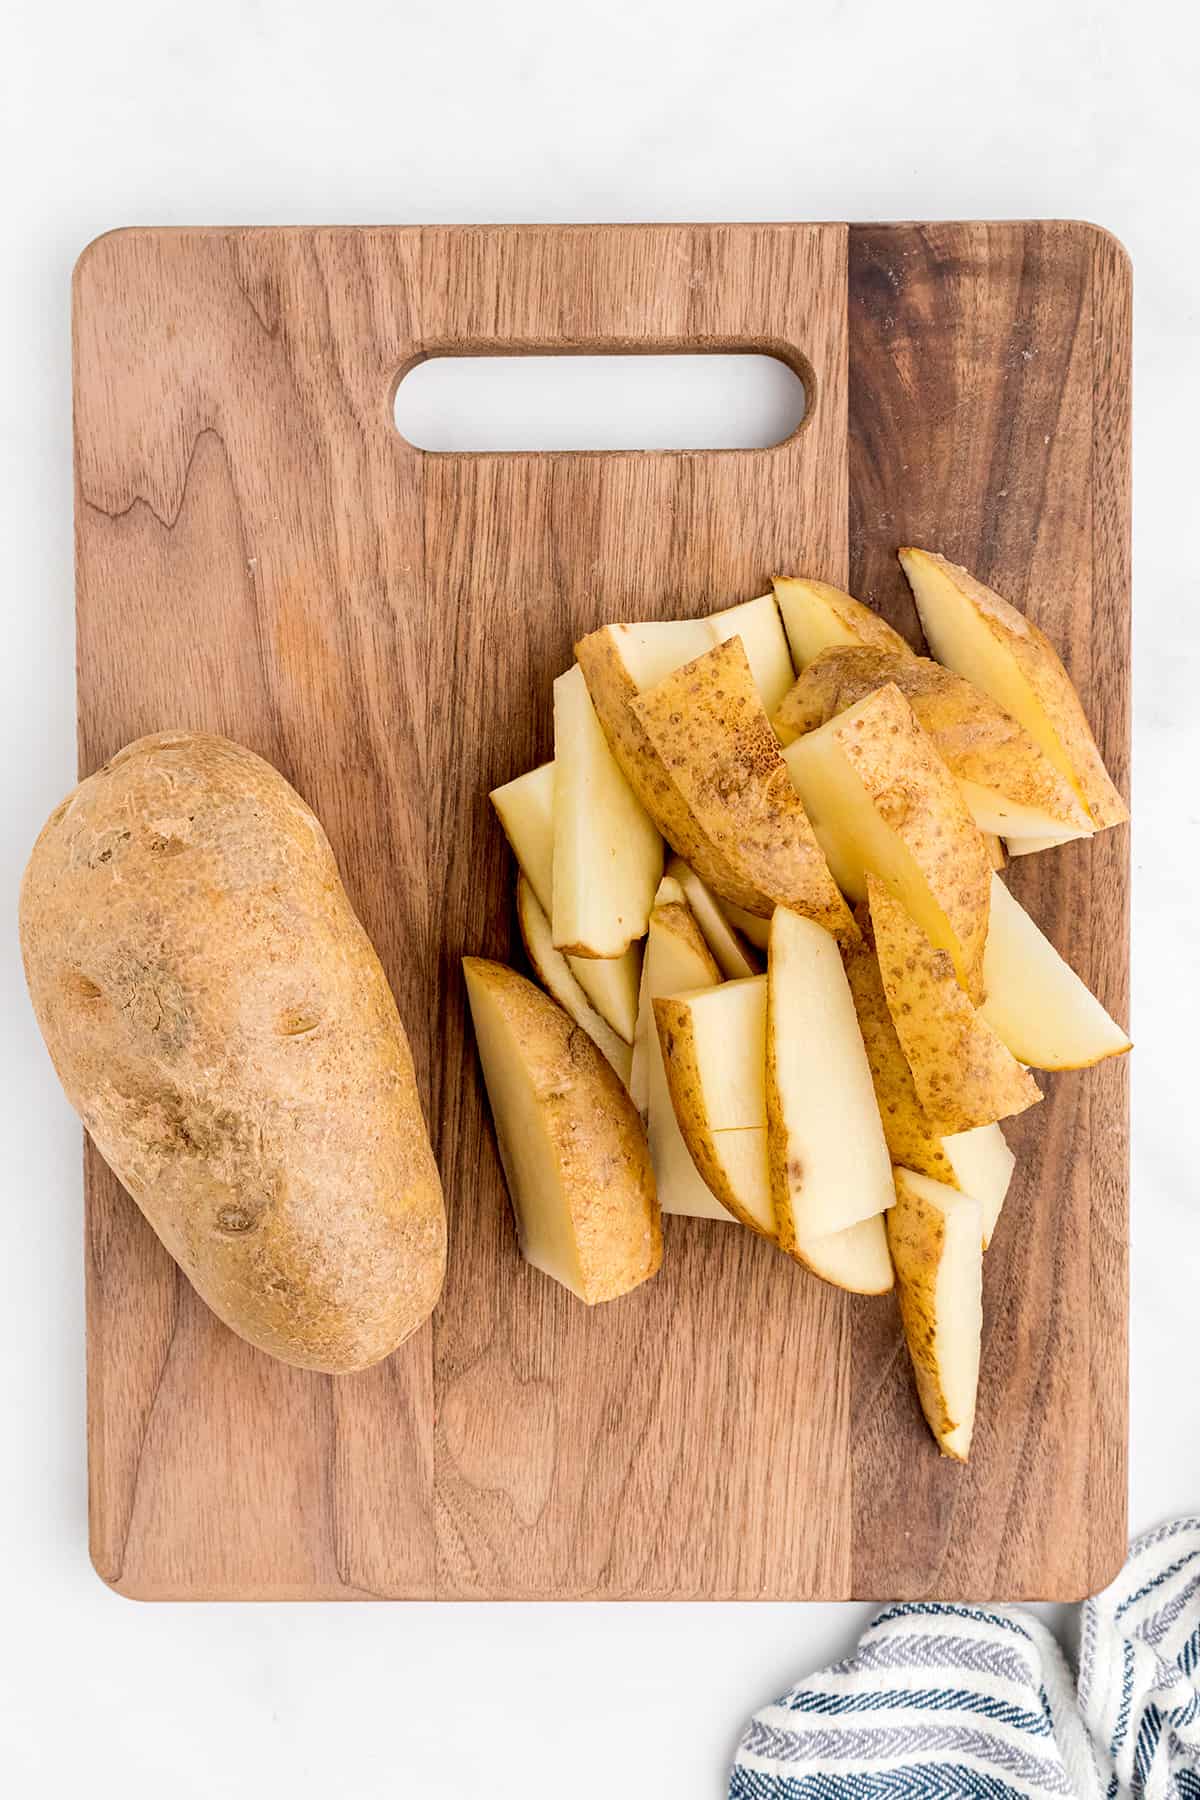 Clean potatoes cut into wedges on a board.